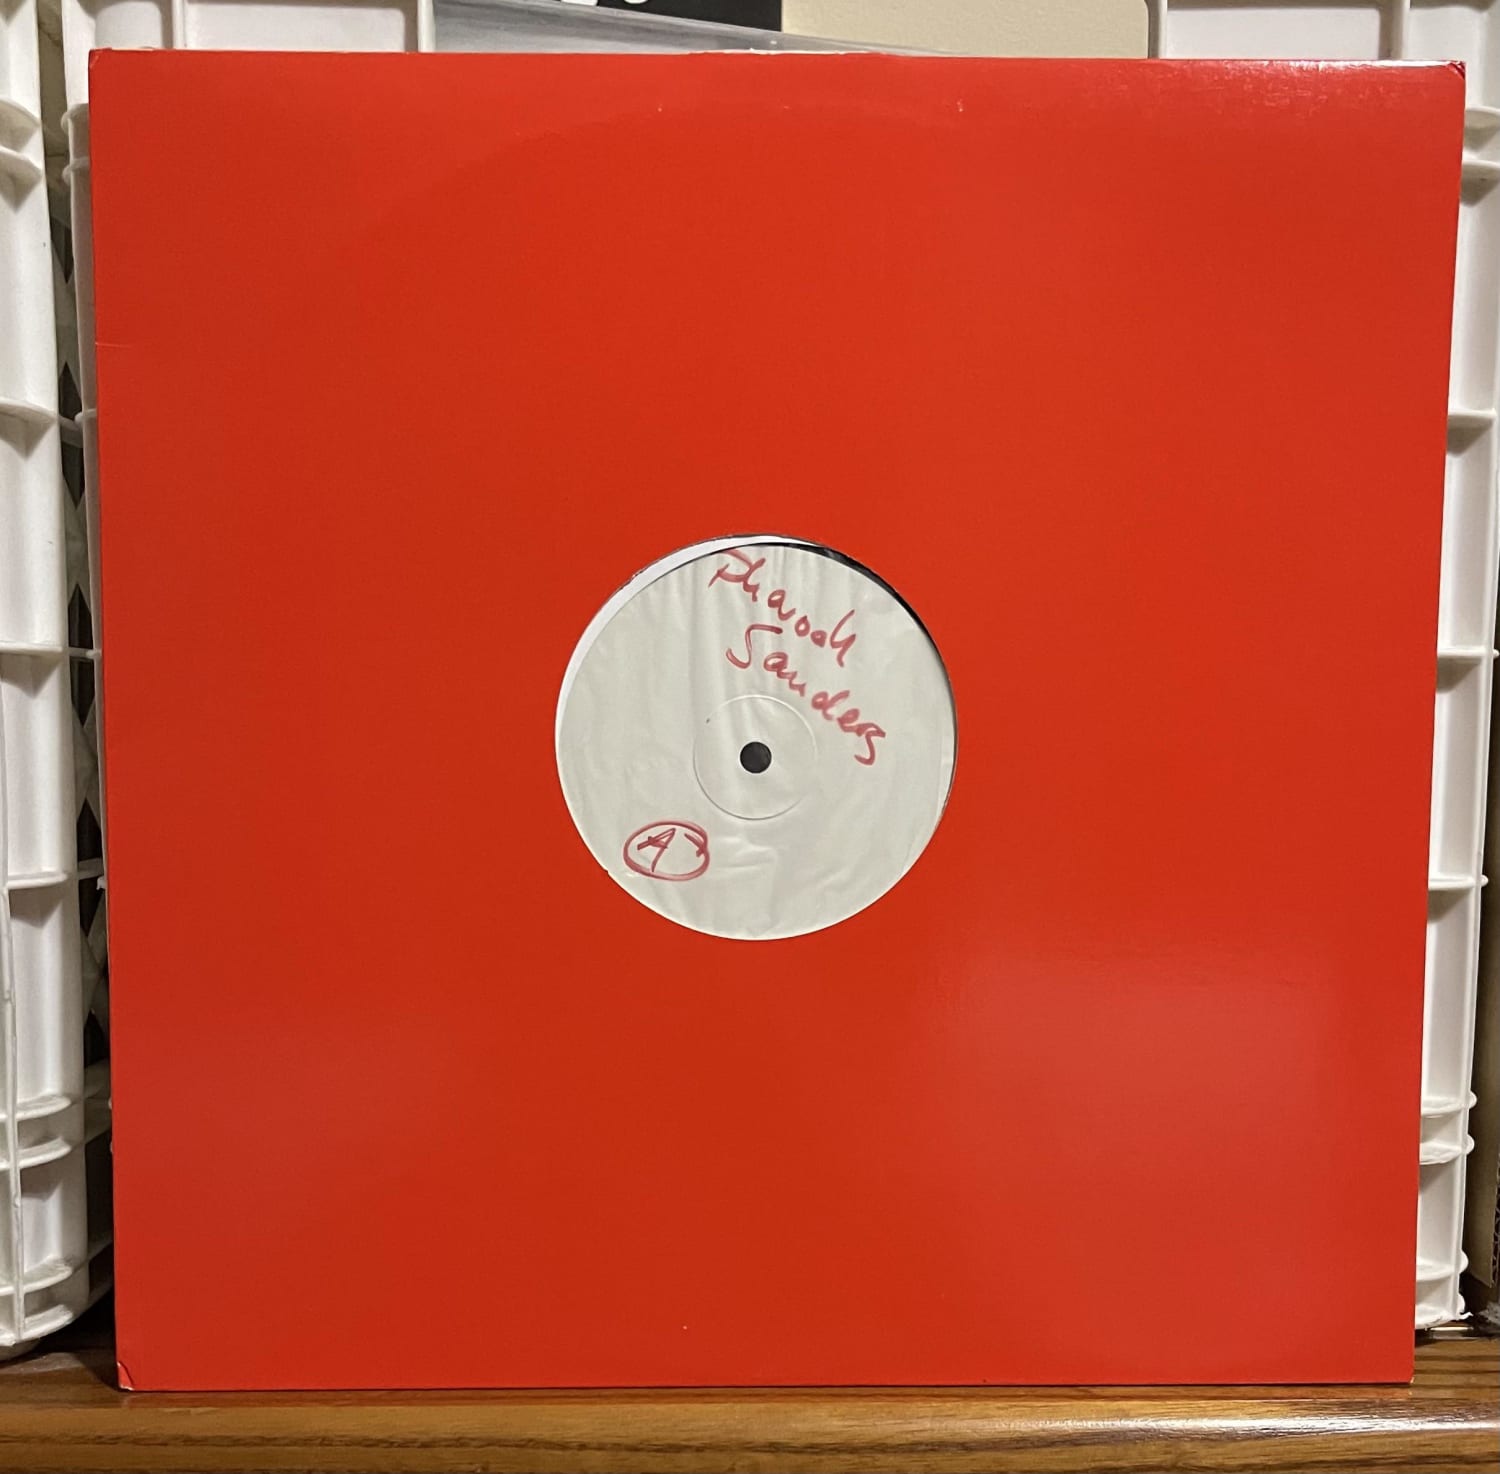 A test pressing of Pharoah Sanders’ “Karma” arrived in the mail today